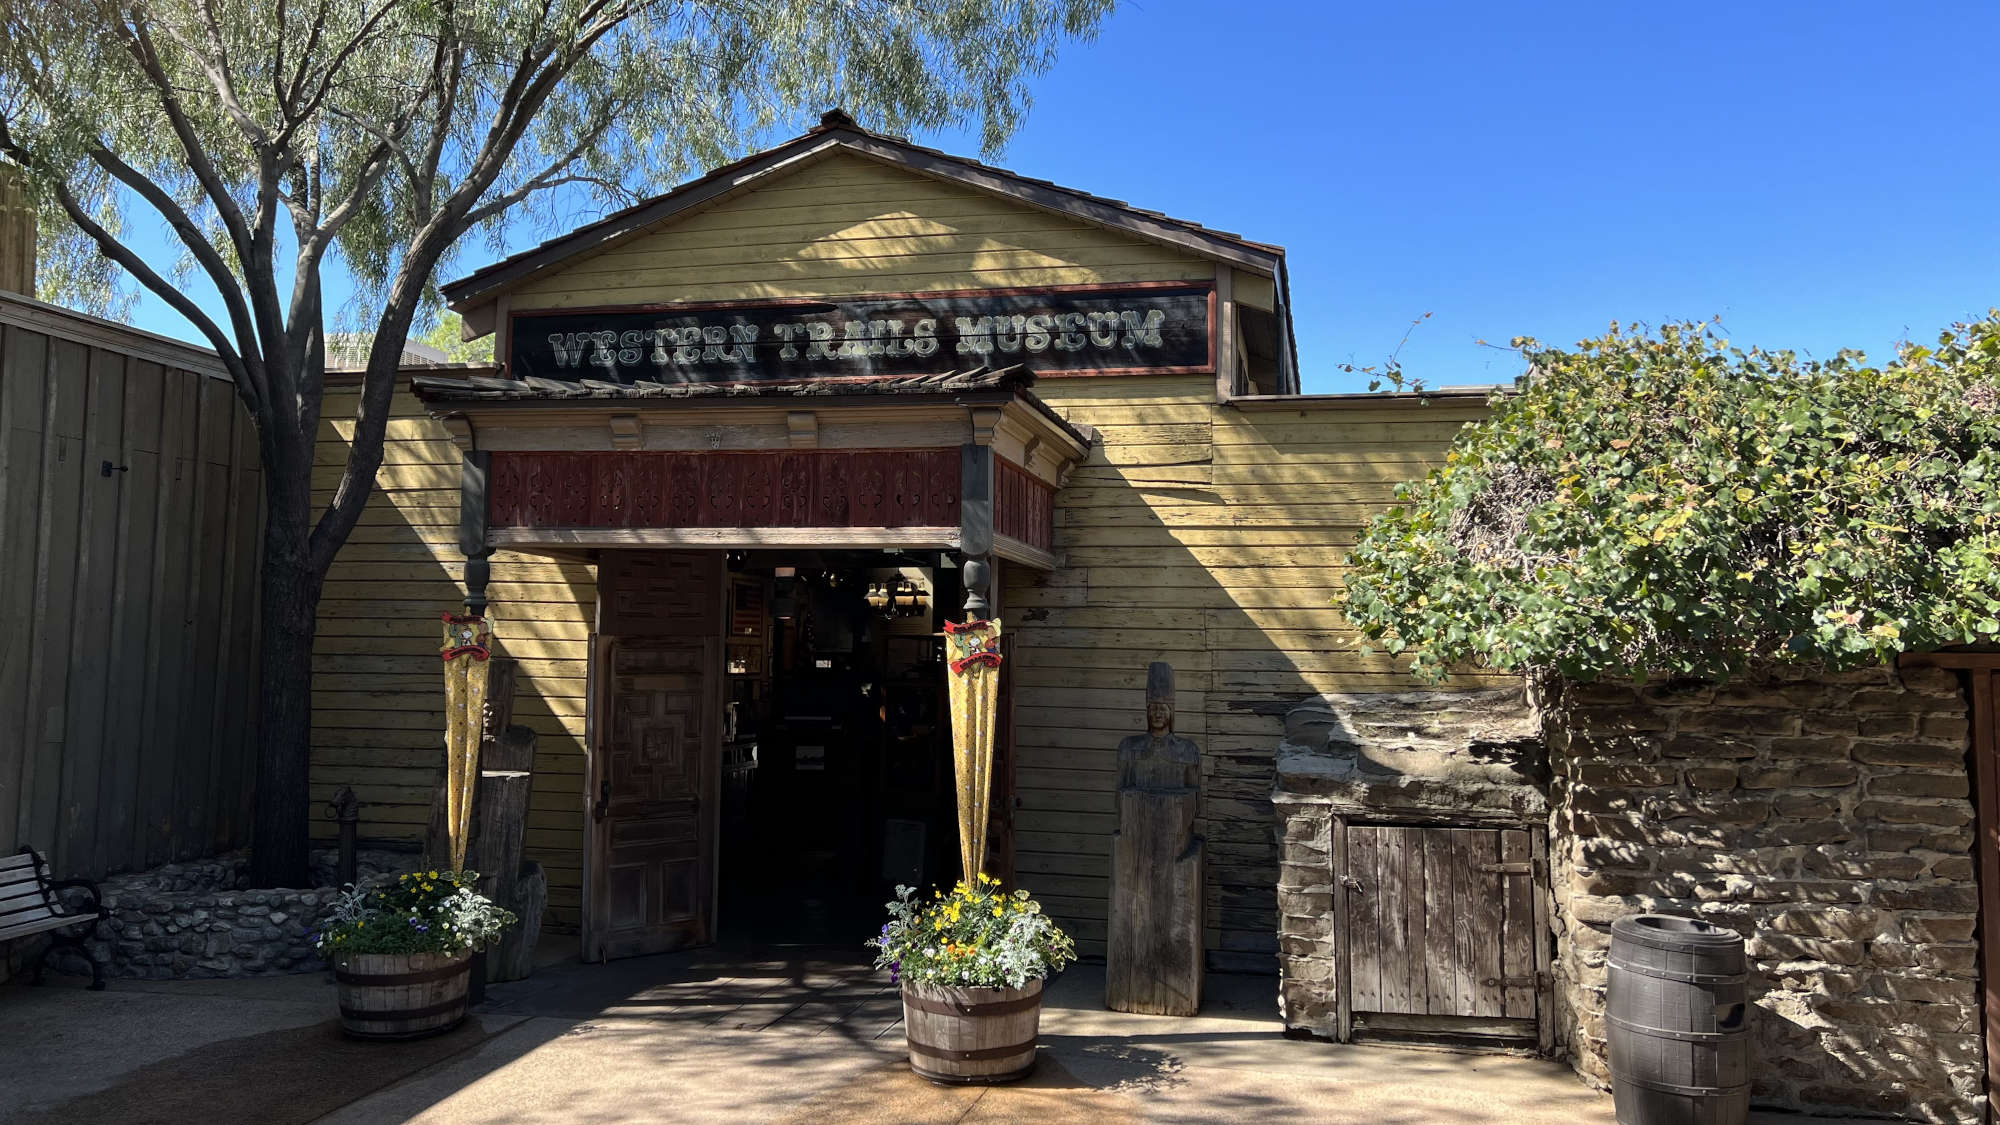 Western Trails Museum at Knotts Berry Farm